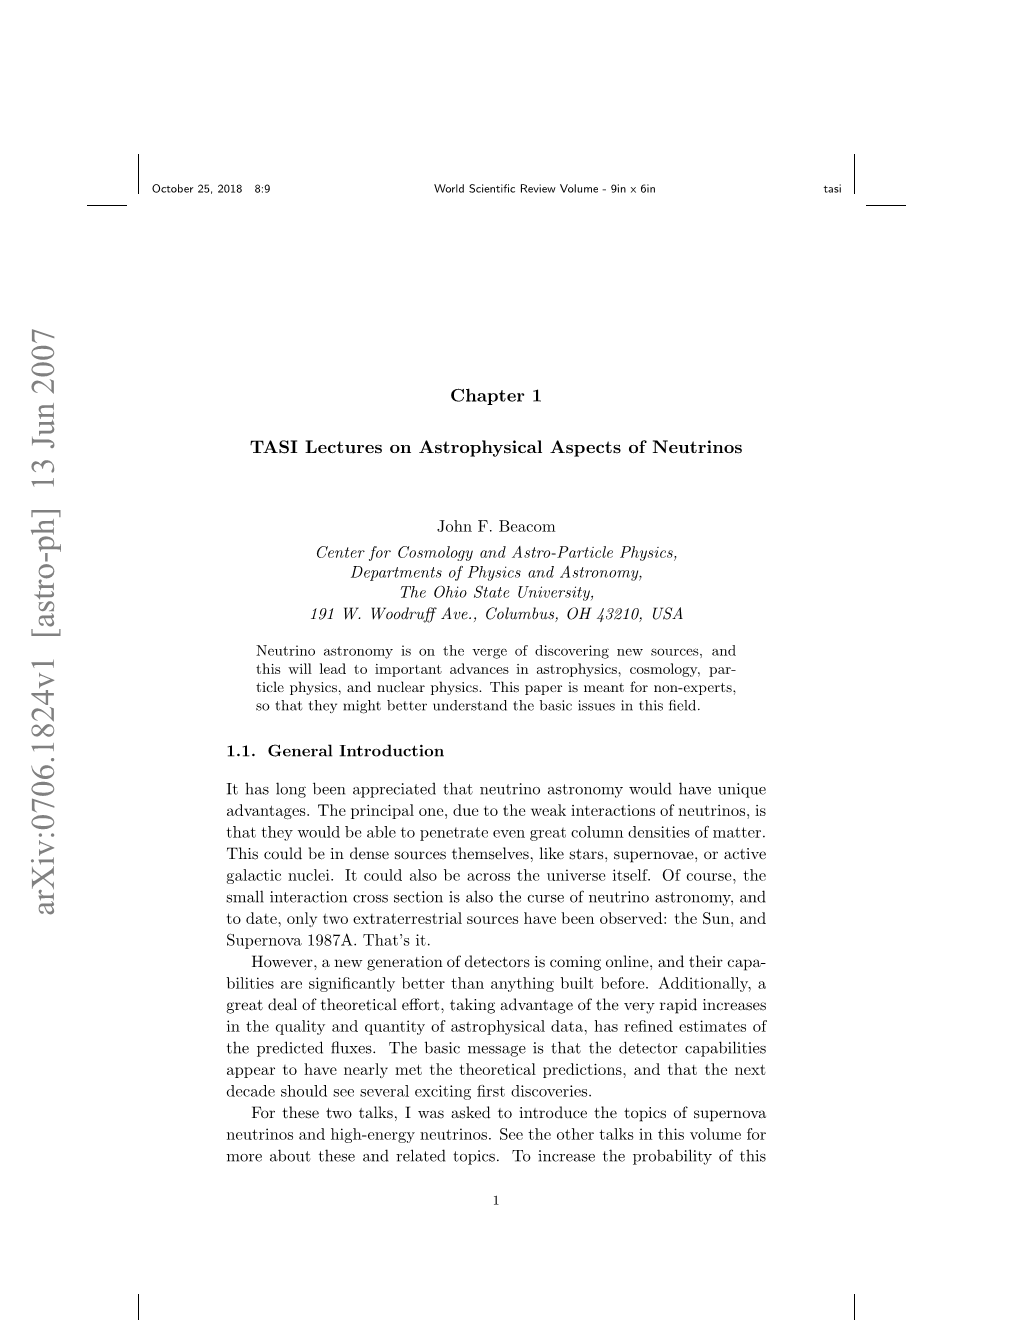 TASI Lectures on Astrophysical Aspects of Neutrinos 3